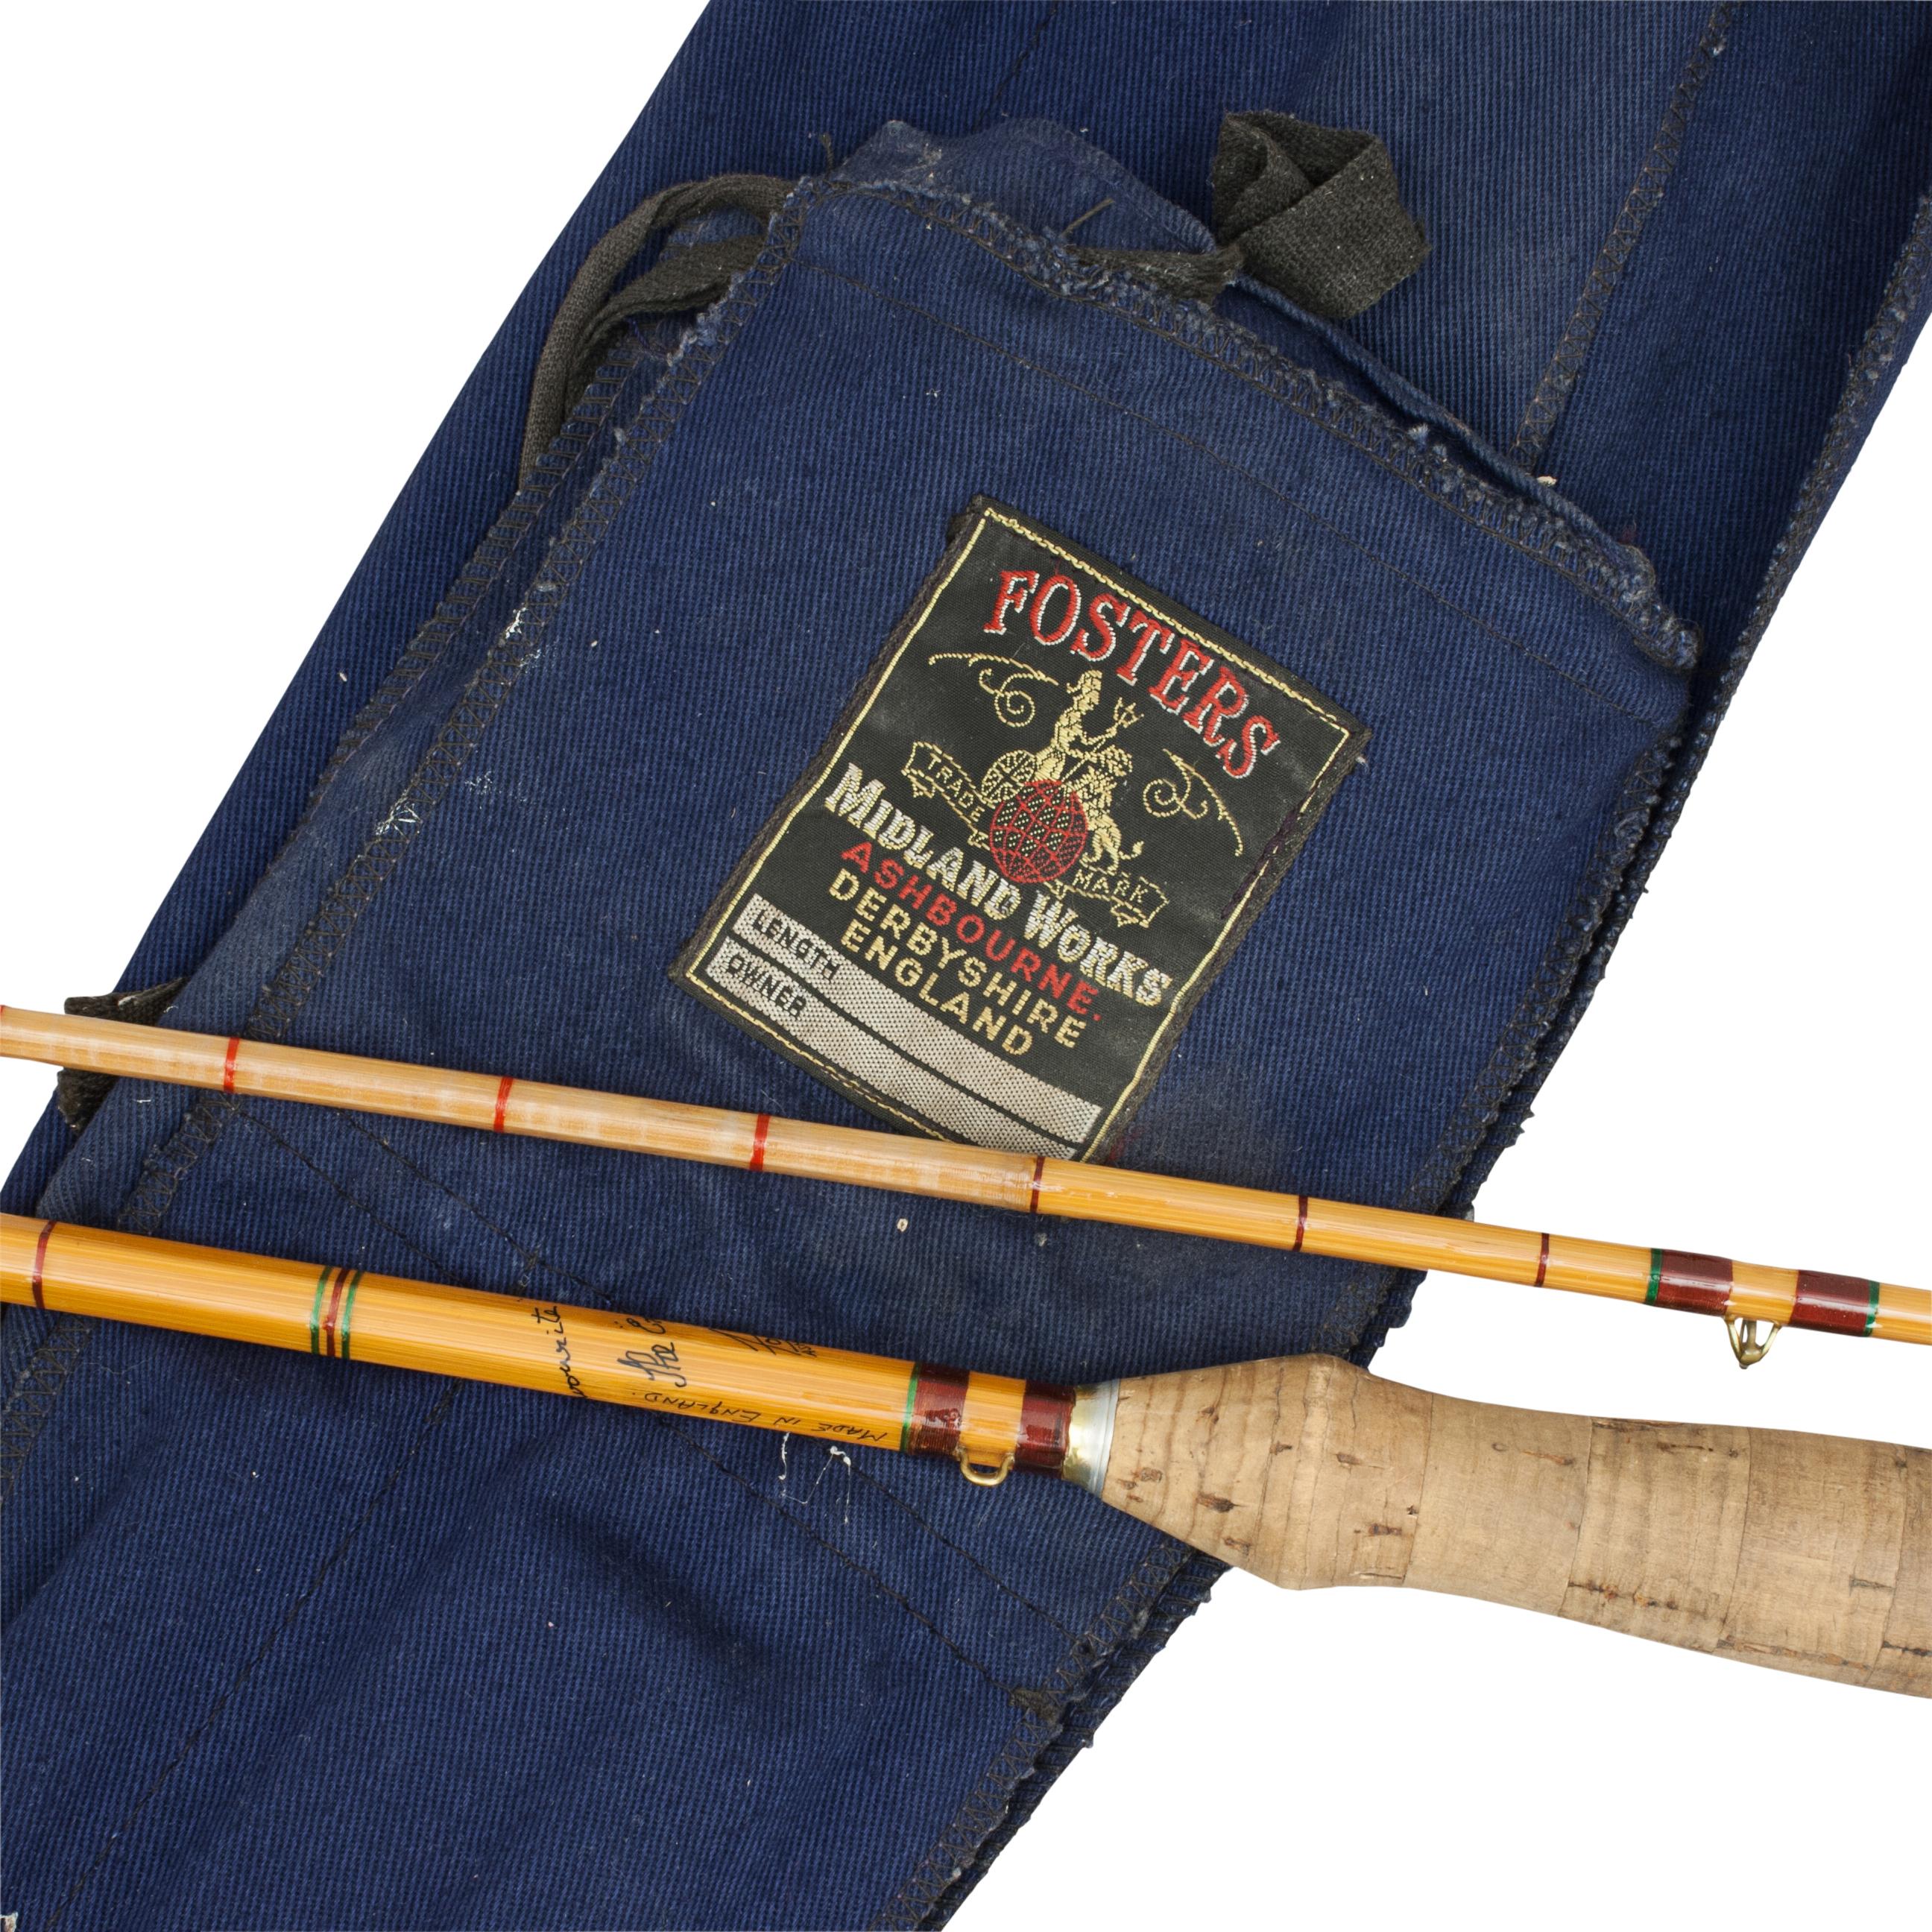 'The England's Favourite' is an 8' 6' split cane two-piece rod made by Fosters, Ashbourne. The rod is in excellent condition with broad crimson inter-whipping, suction joint with a wooden stopper, fixed screw reel grip with a cork covered housing